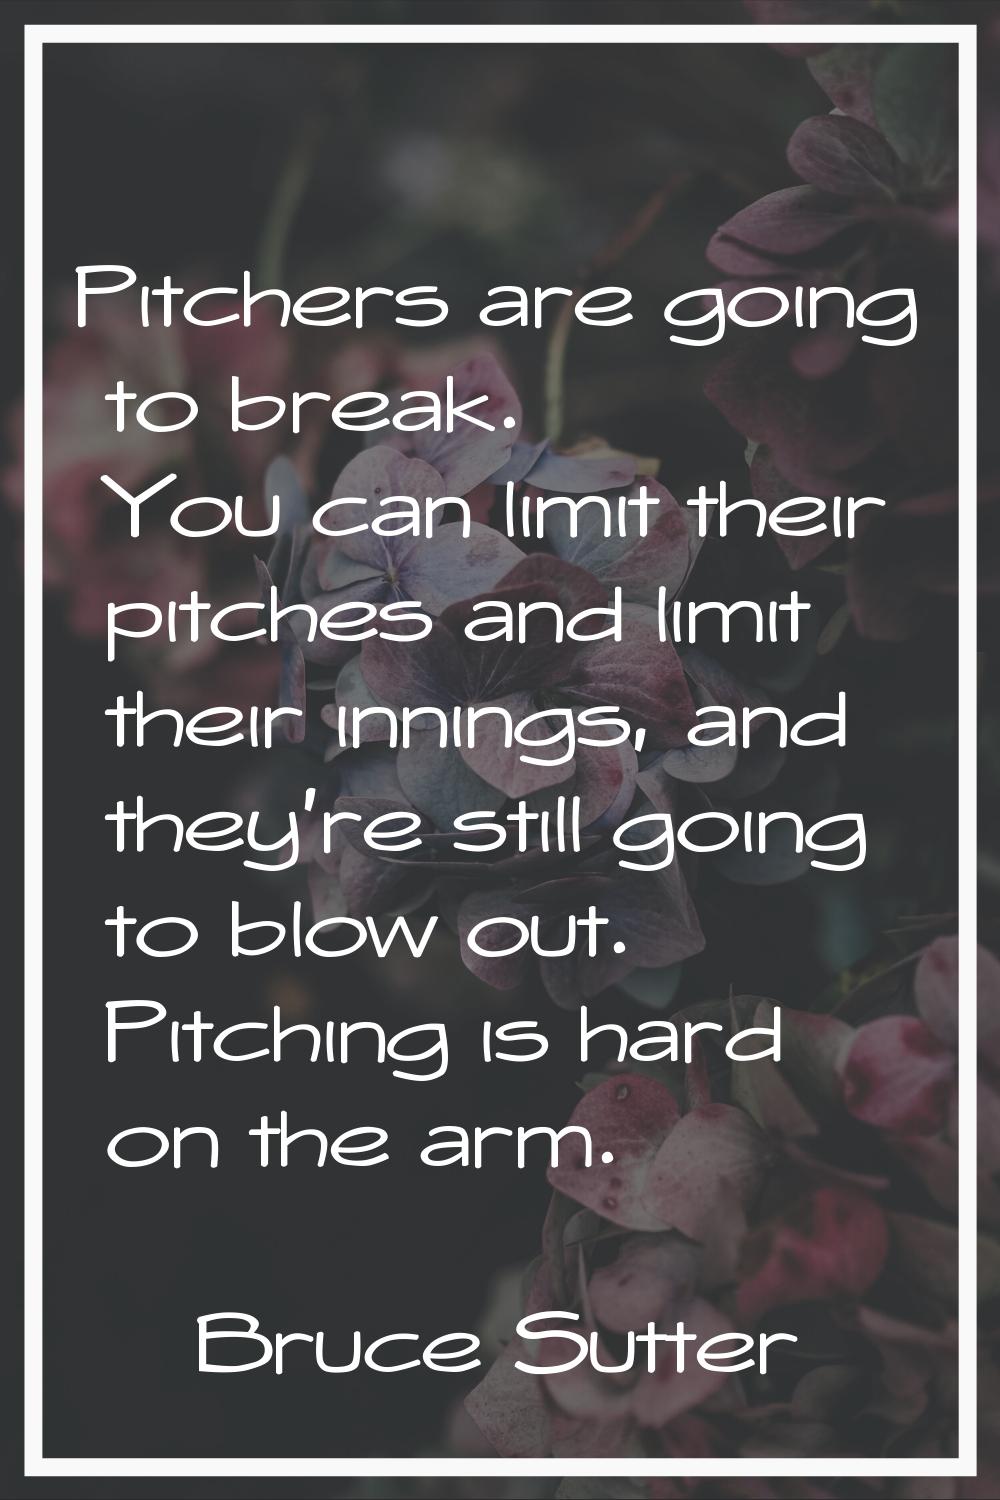 Pitchers are going to break. You can limit their pitches and limit their innings, and they're still